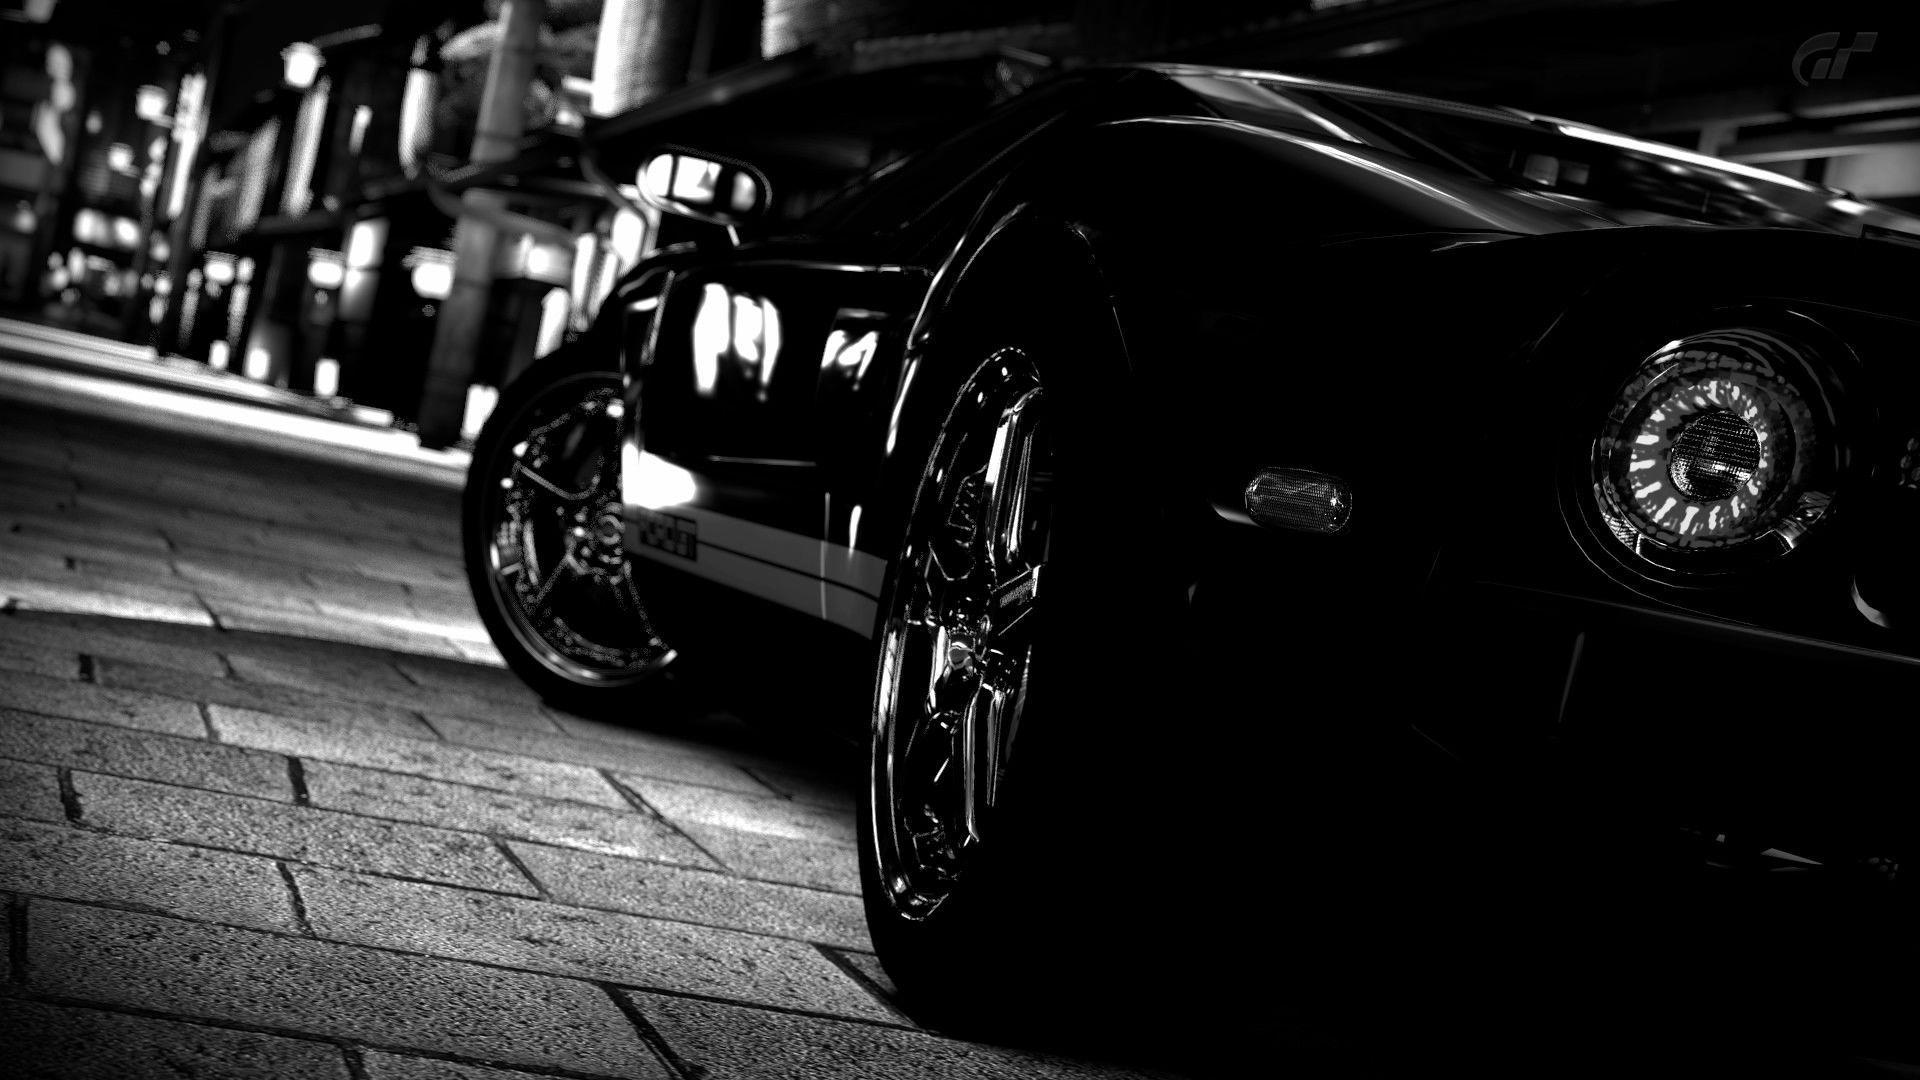 Picture Ford GT Black 1080p HD Wallpaper Car, Image